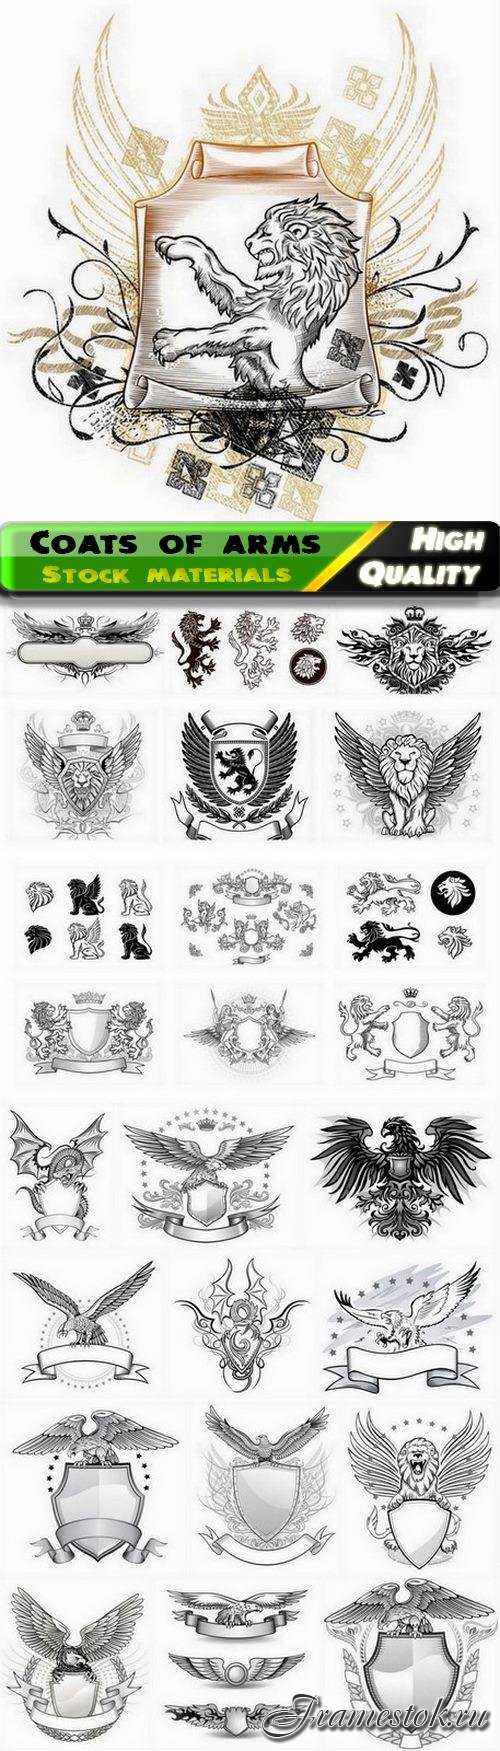 Heraldry coats of arms with shield bird wings dragon and lion 25 Eps